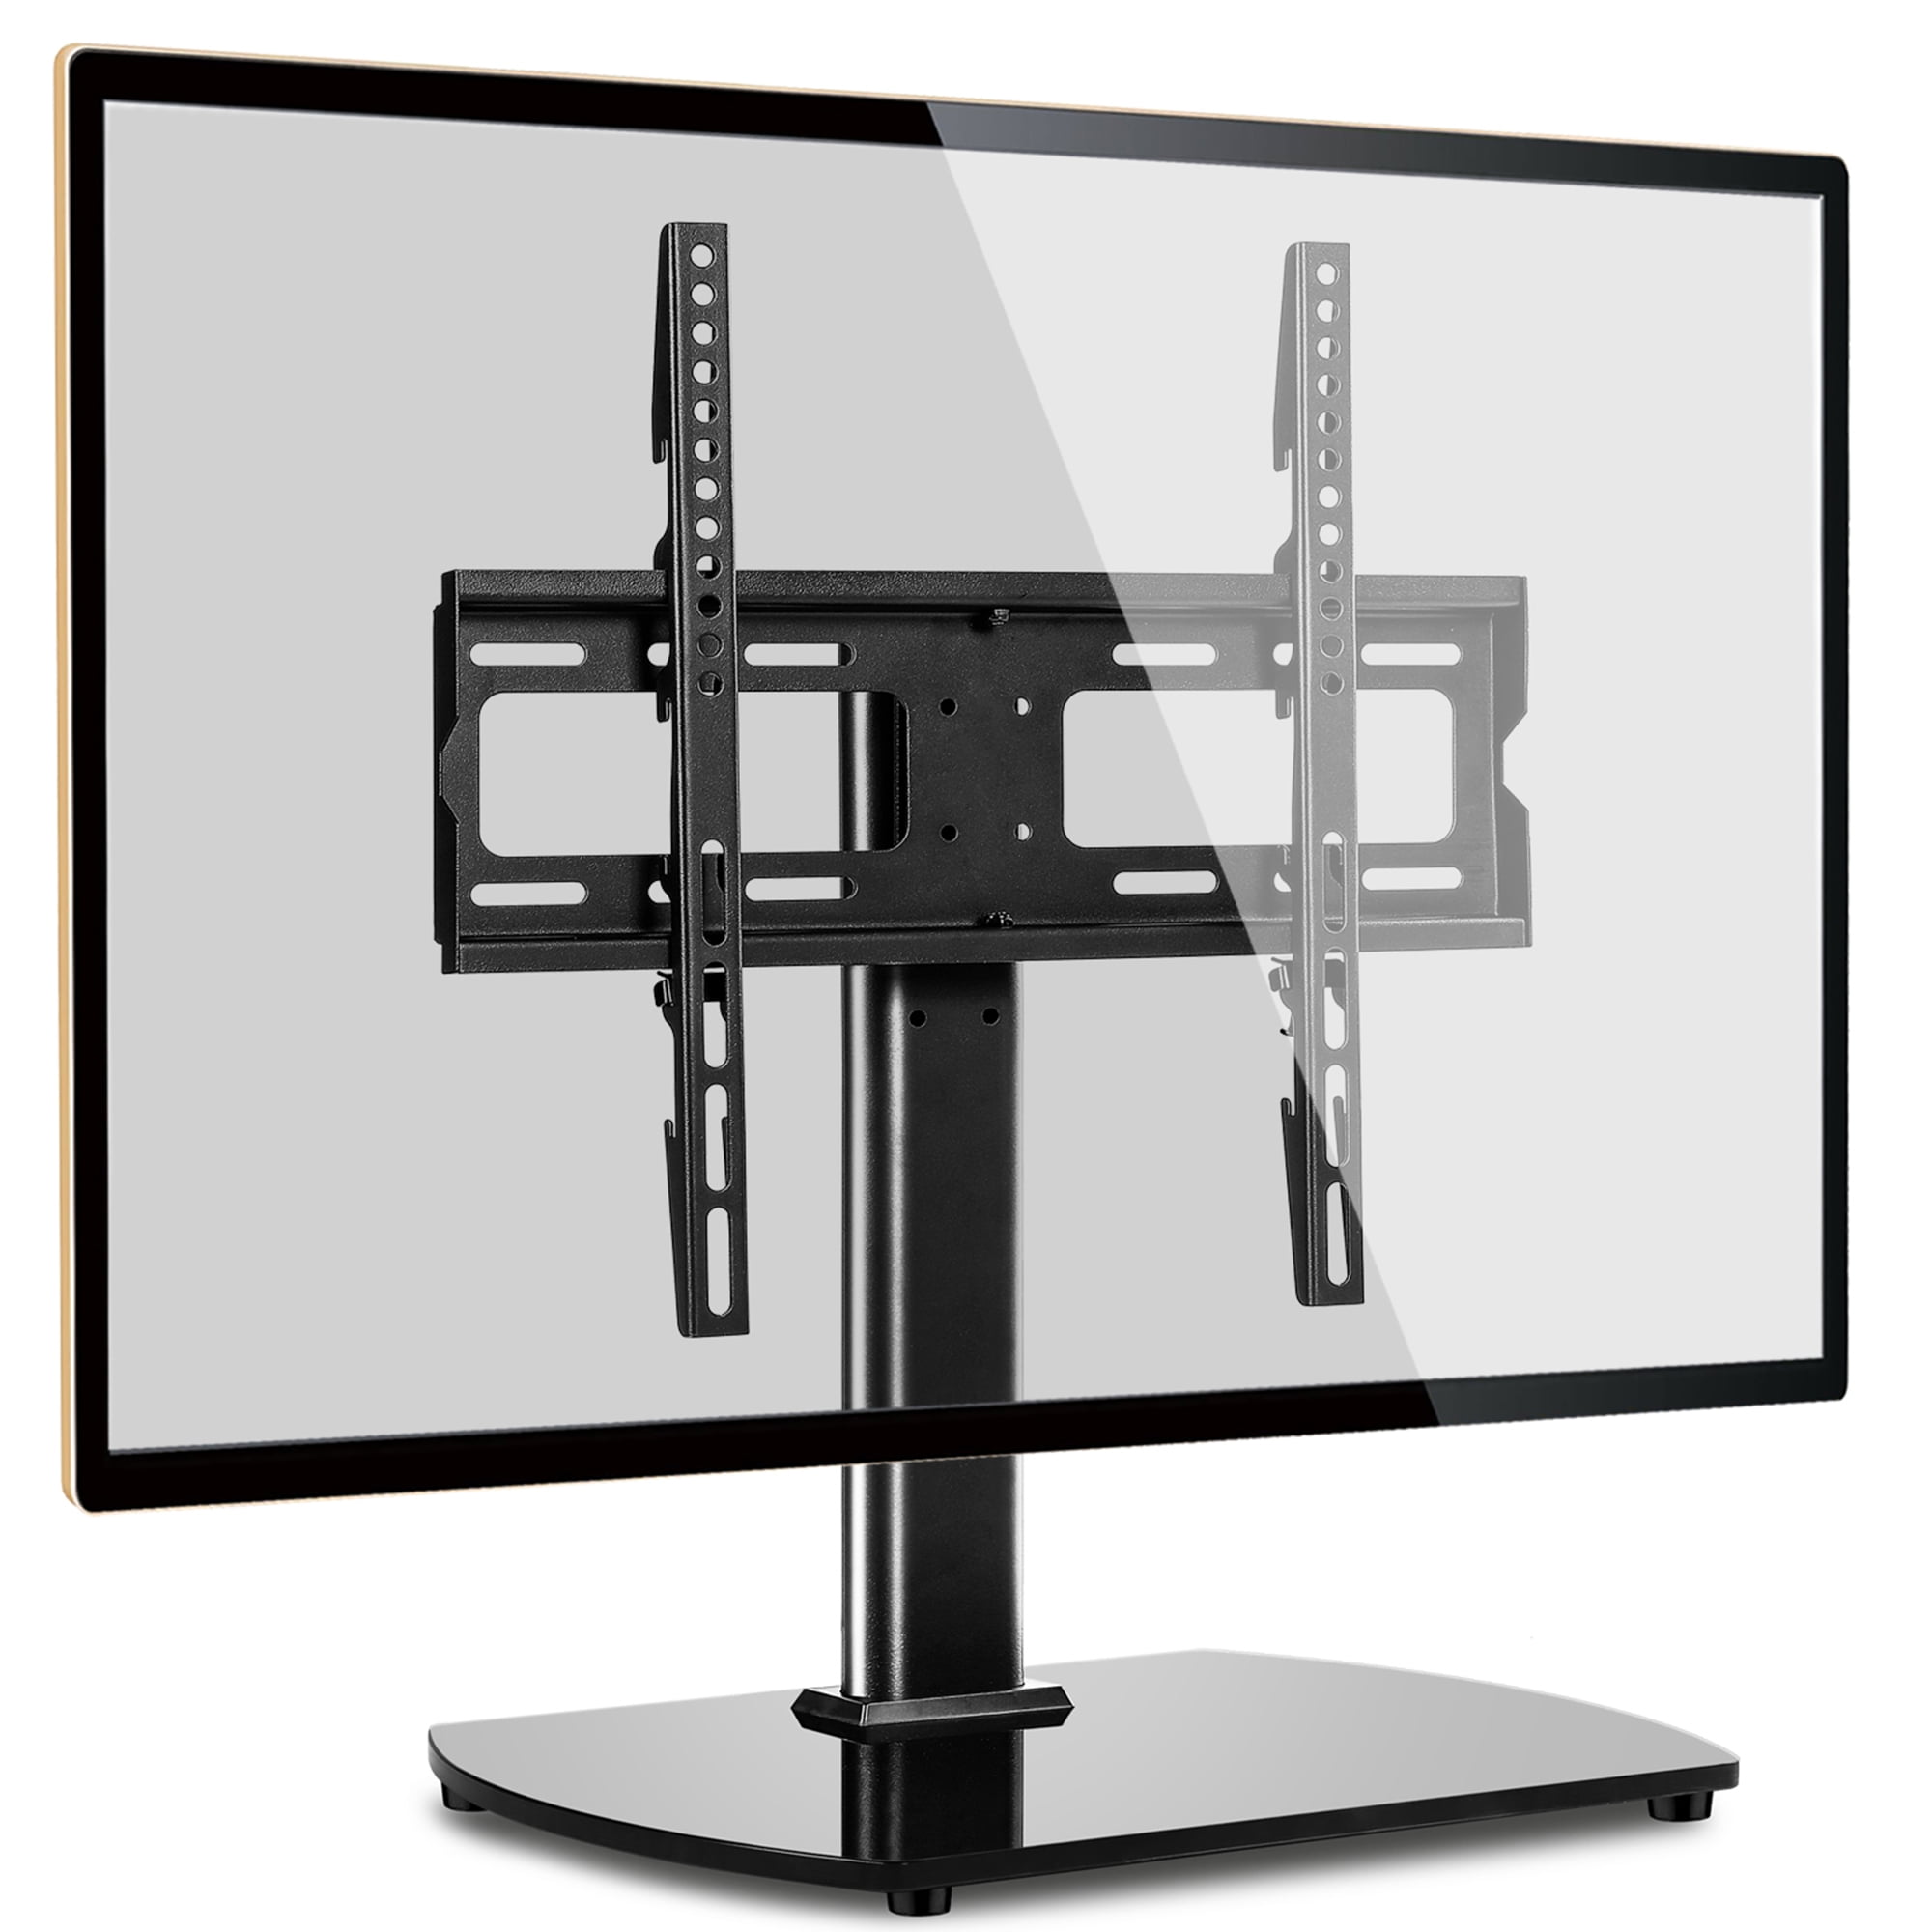 Details about   Tabletop TV Stand Base with Swivel Mount for 27 32 37 40 42 46 50 55" TVs 